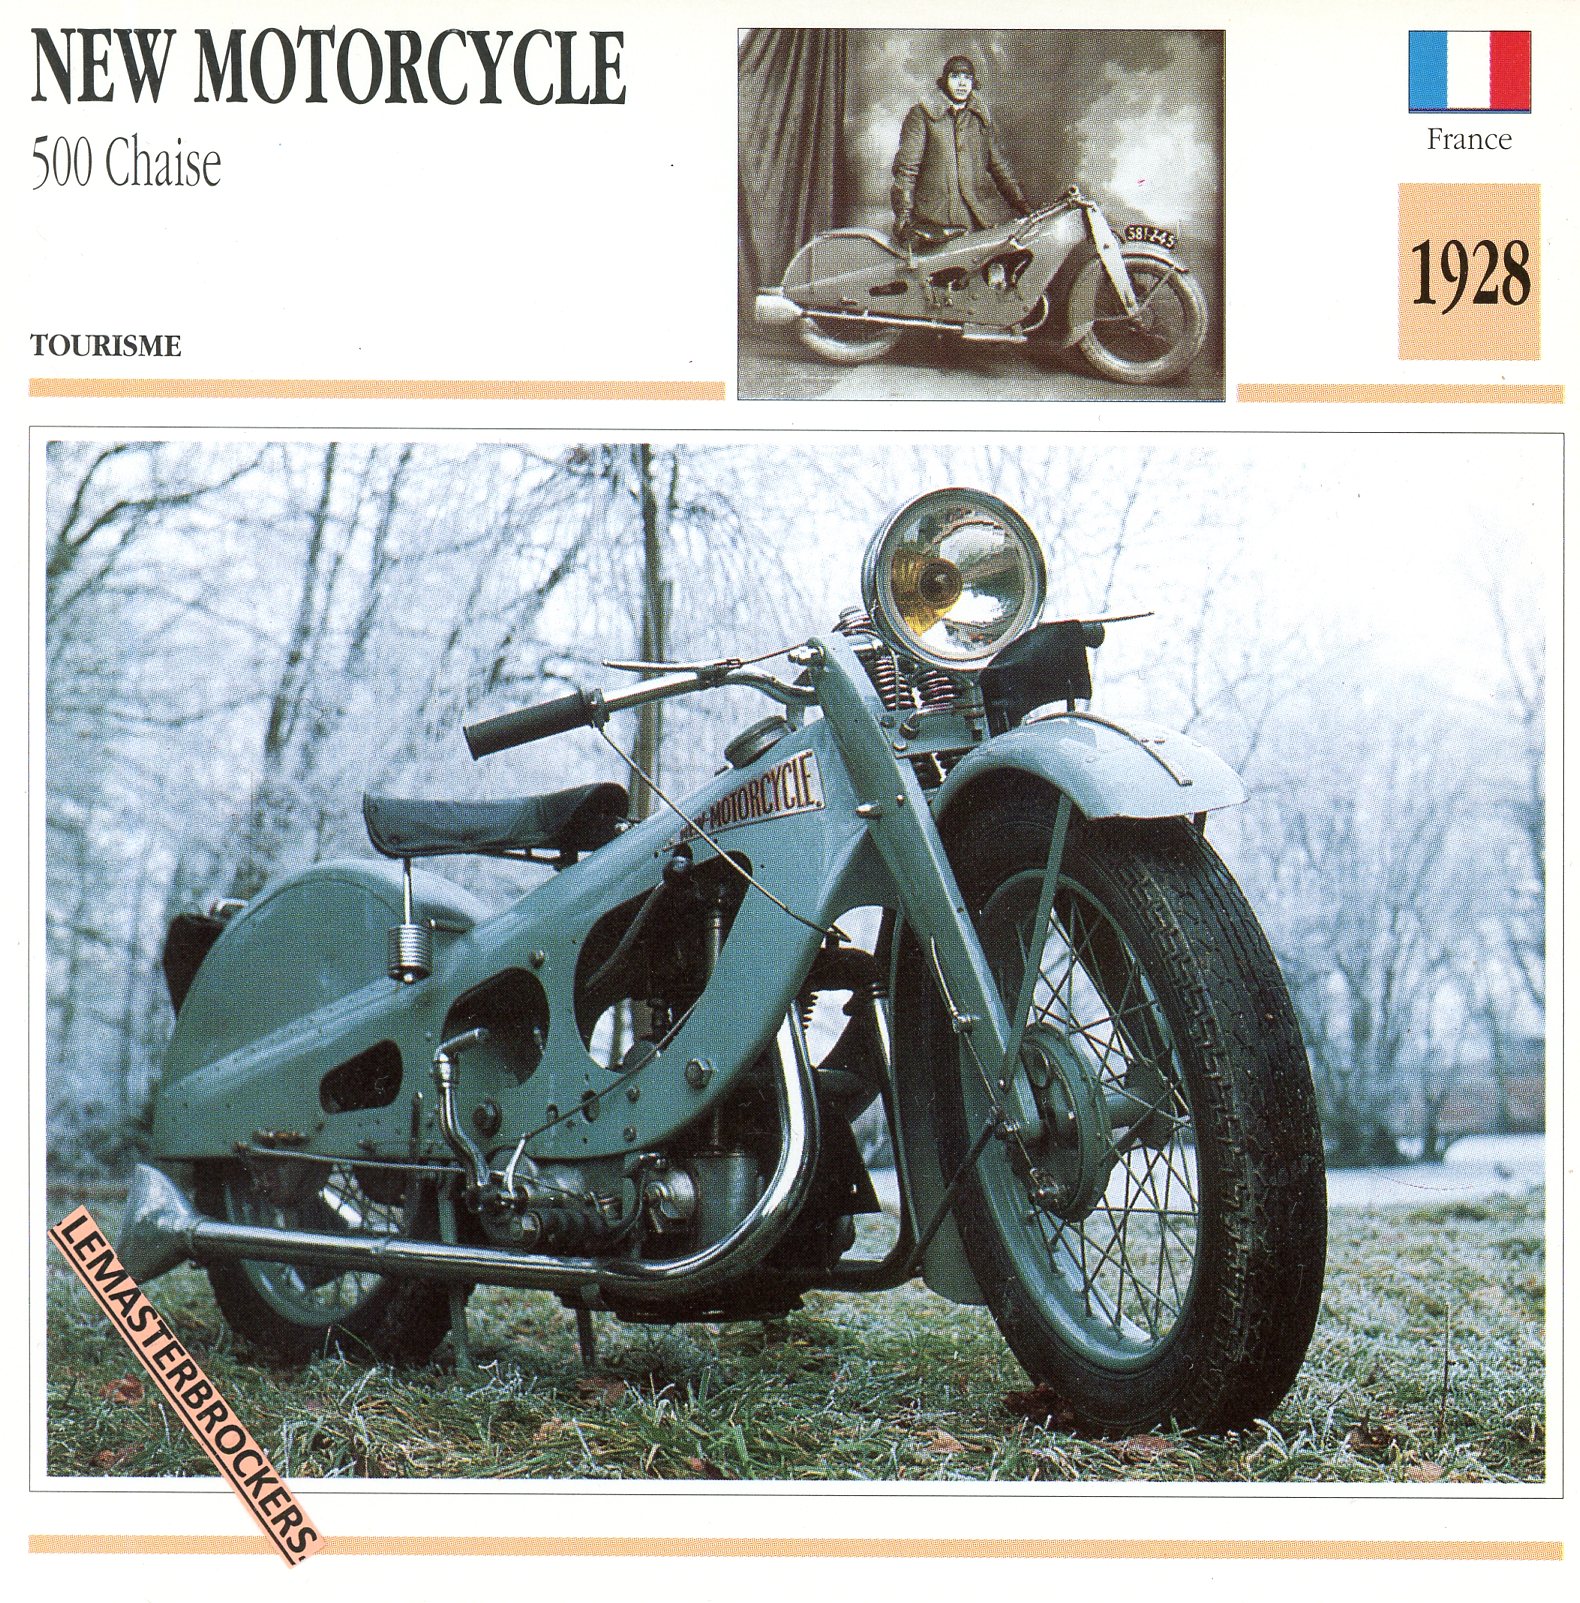 NEW-MOTORCYCLE-CHAISE-1928-FICHE-MOTO-ATLAS-lemasterbrockers-CARD